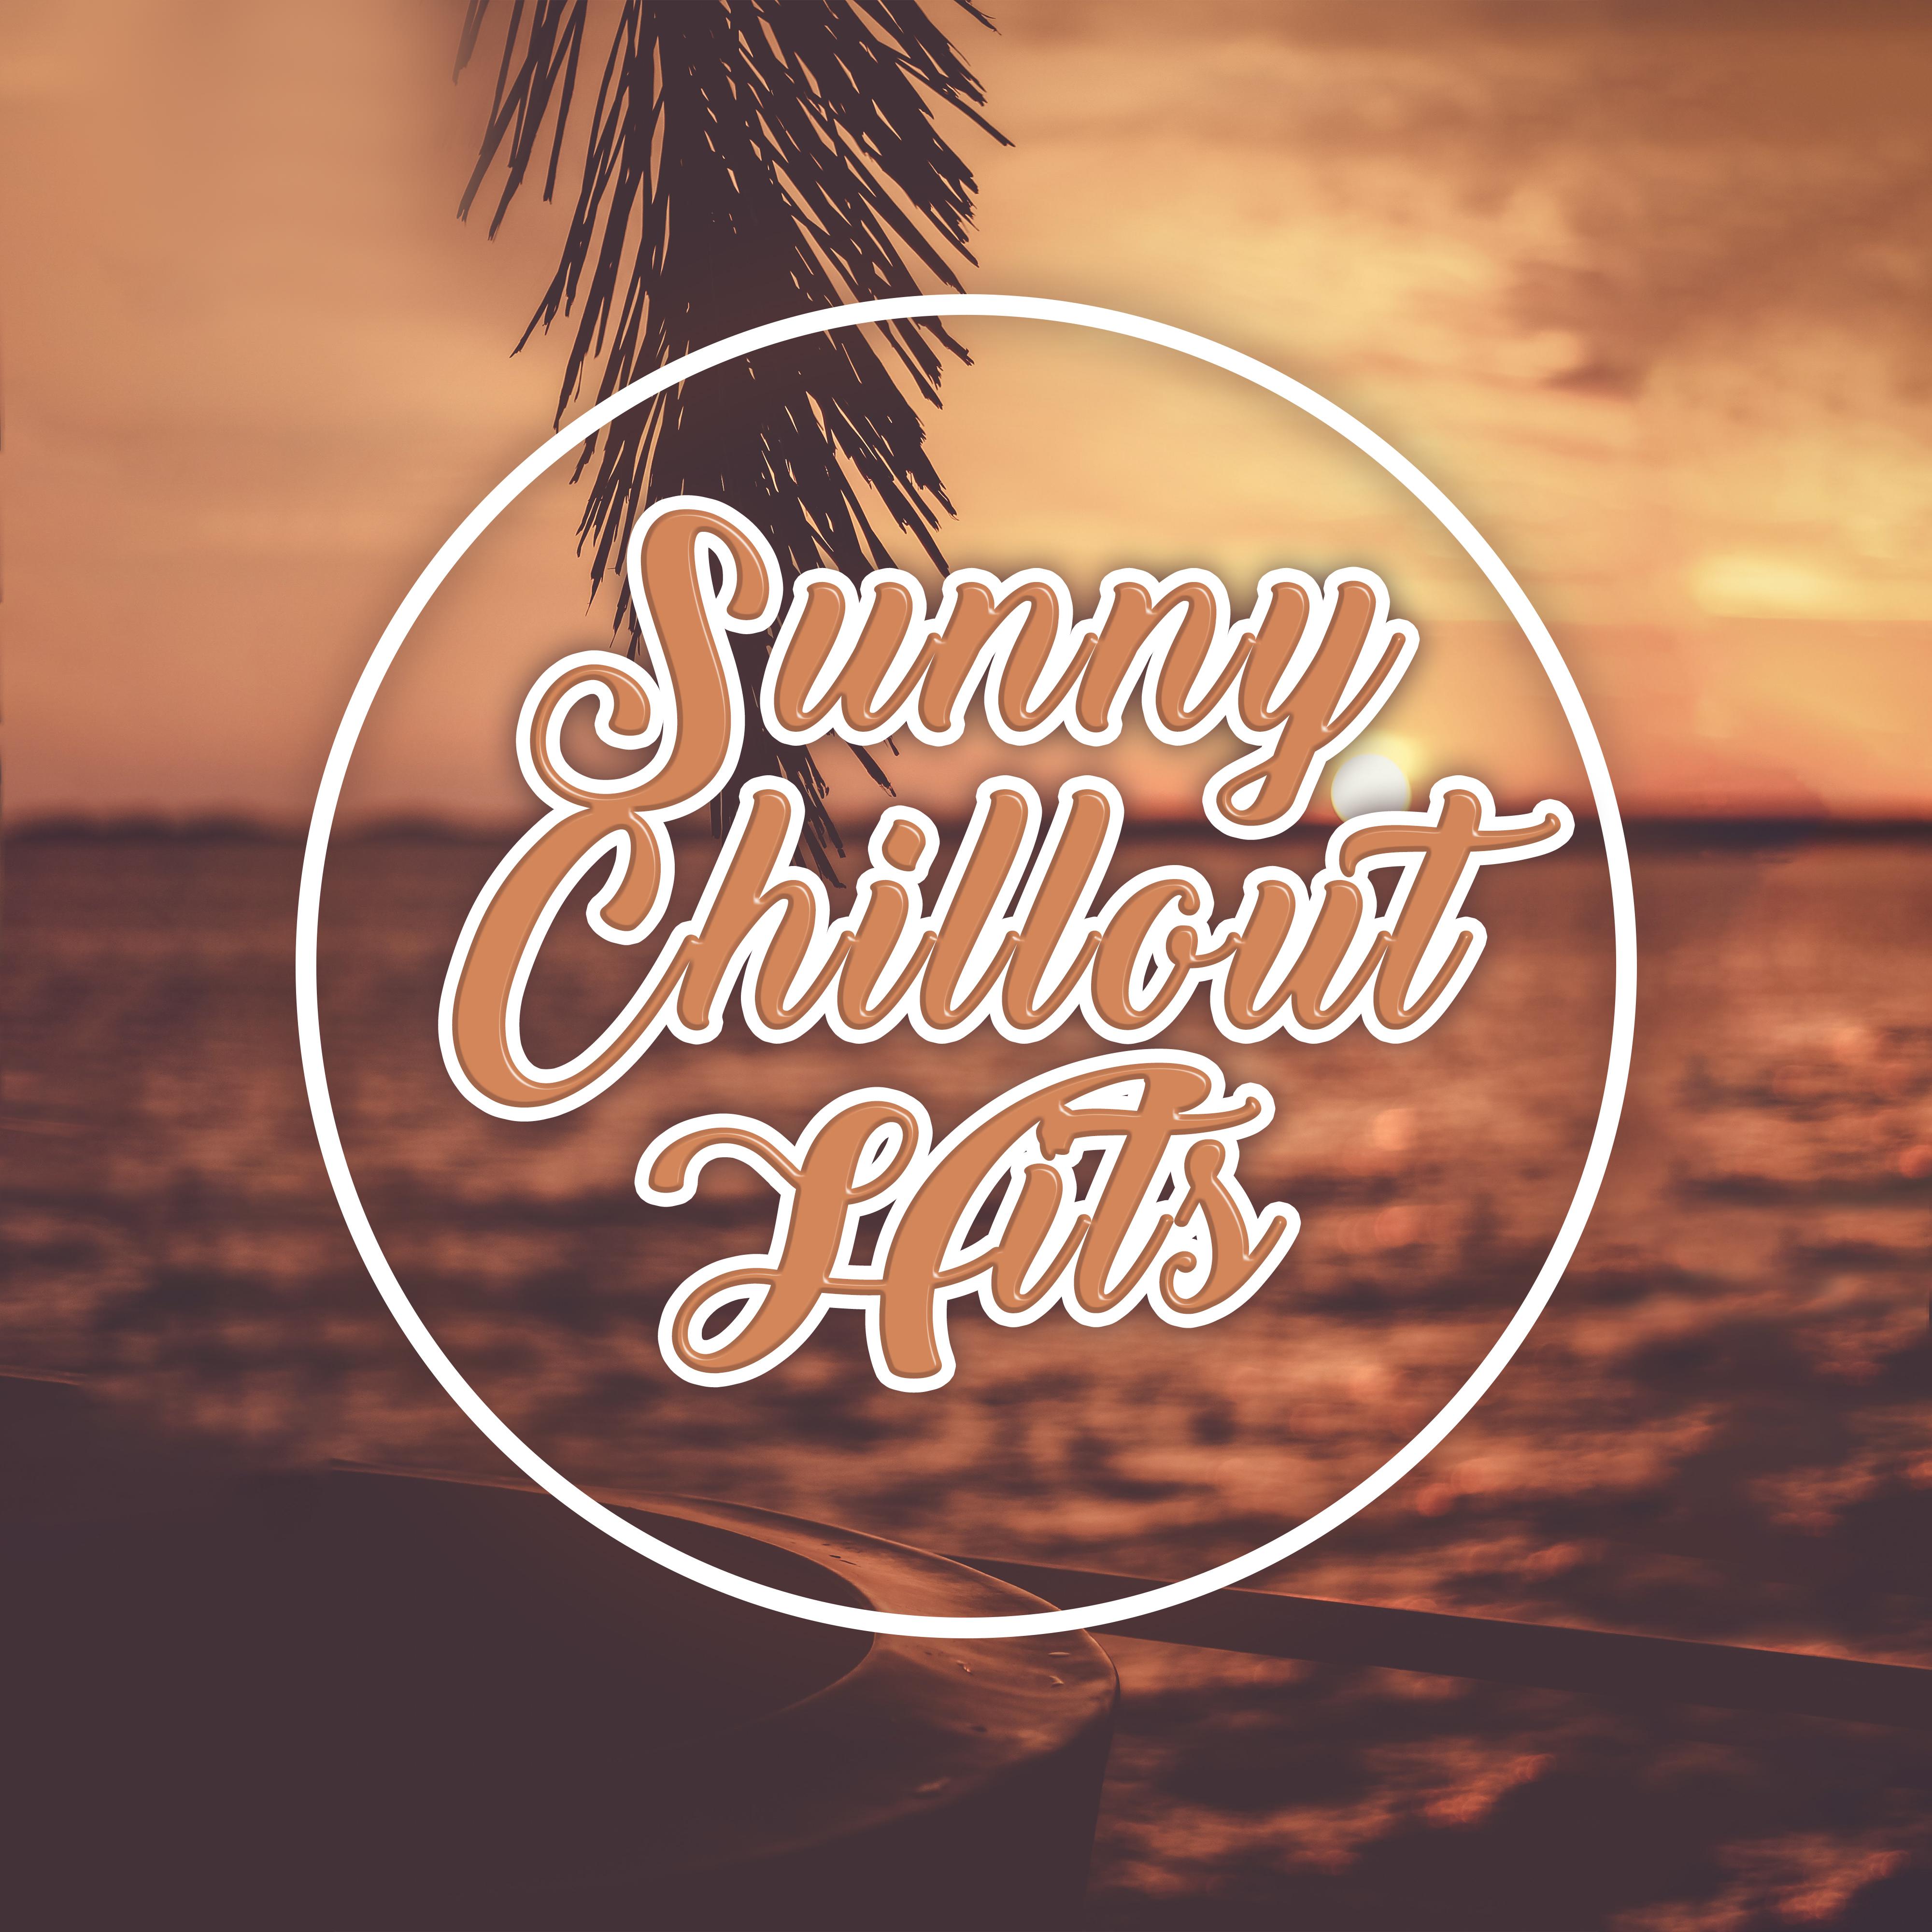 Sunny Chillout Hits – Chillout 2018